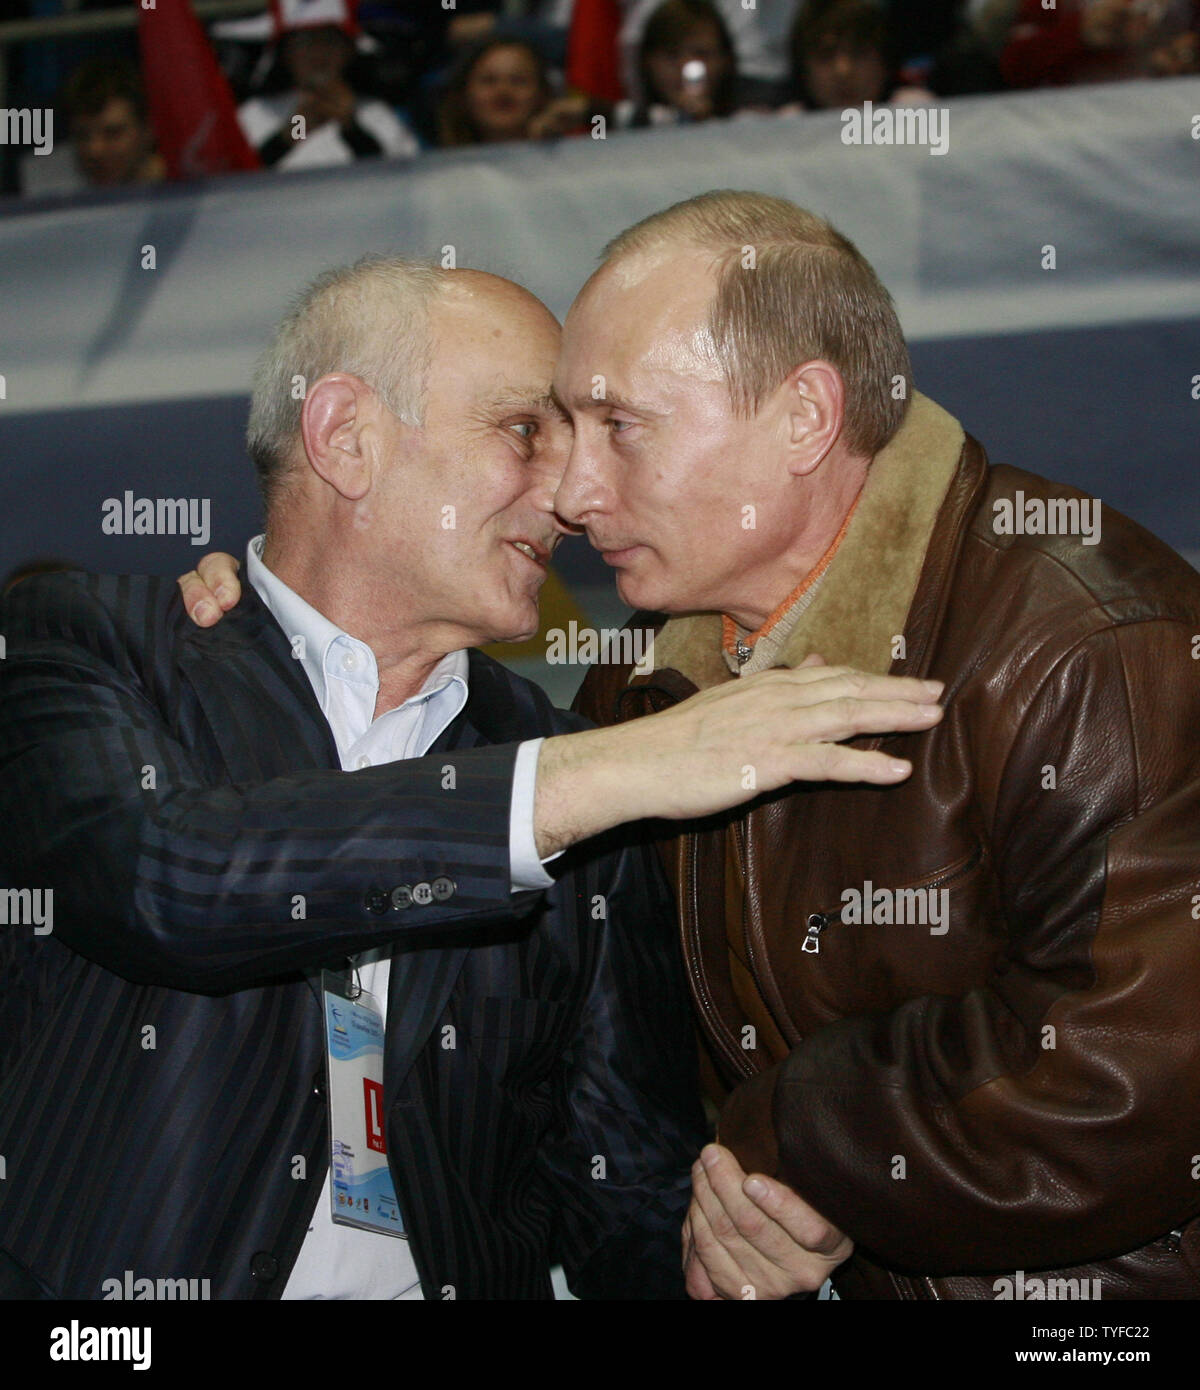 Russian President Vladimir Putin (R) greets his first judo coach Anatoli Rakhlin as he attends a judo competition in Moscow on December 15, 2007. Putin accused the West on Saturday of playing politics with European arms control and warned that the launch of US interceptor missiles could trigger a Russian missile strike. (UPI Photo/Anatoli Zhdanov).. Stock Photo